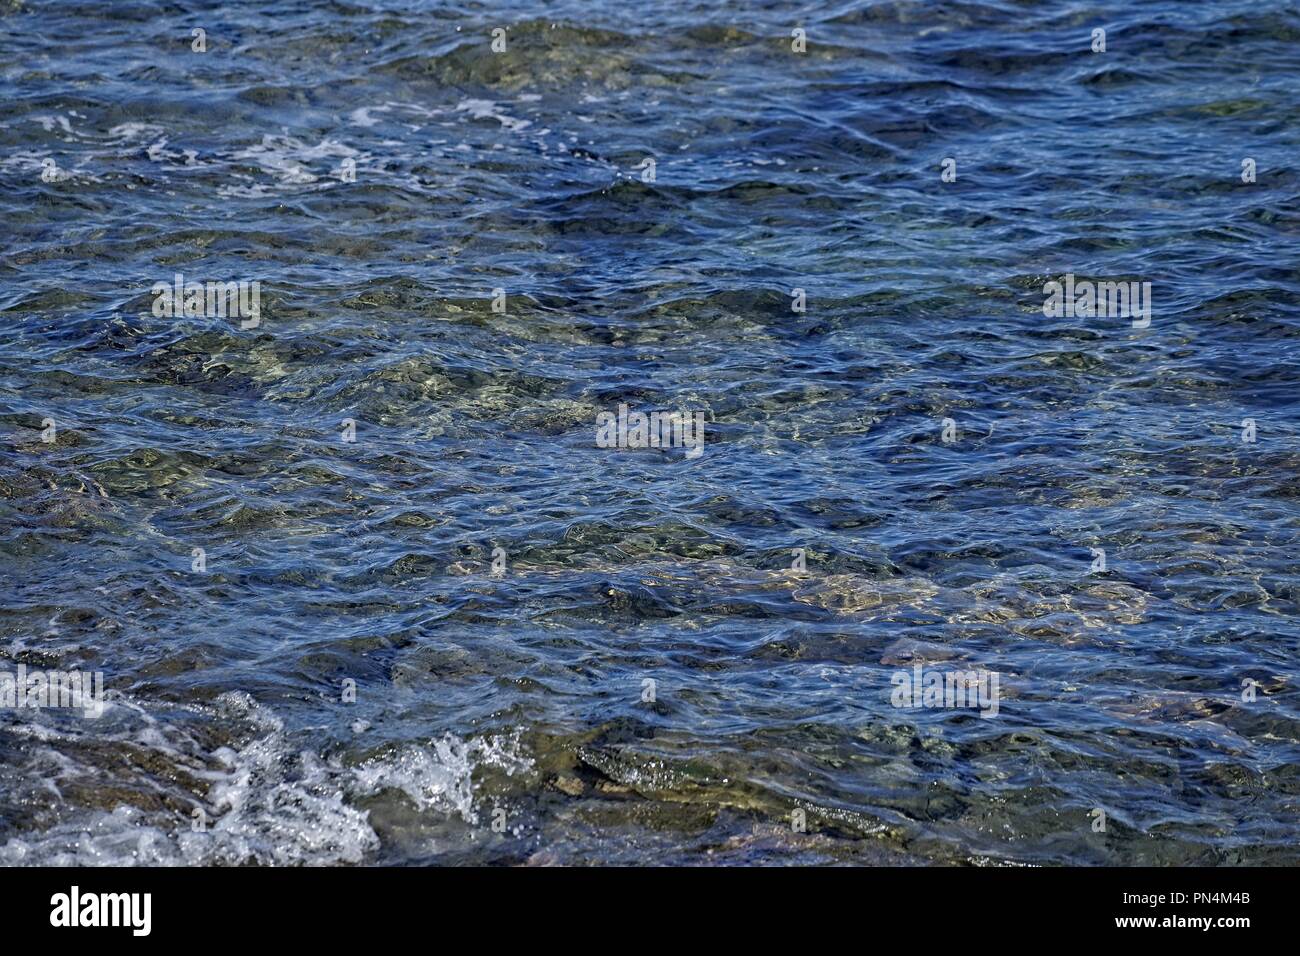 Textured ripples on the surface of the shallow water, at a beach. Rocks showing just below the surface. Stock Photo